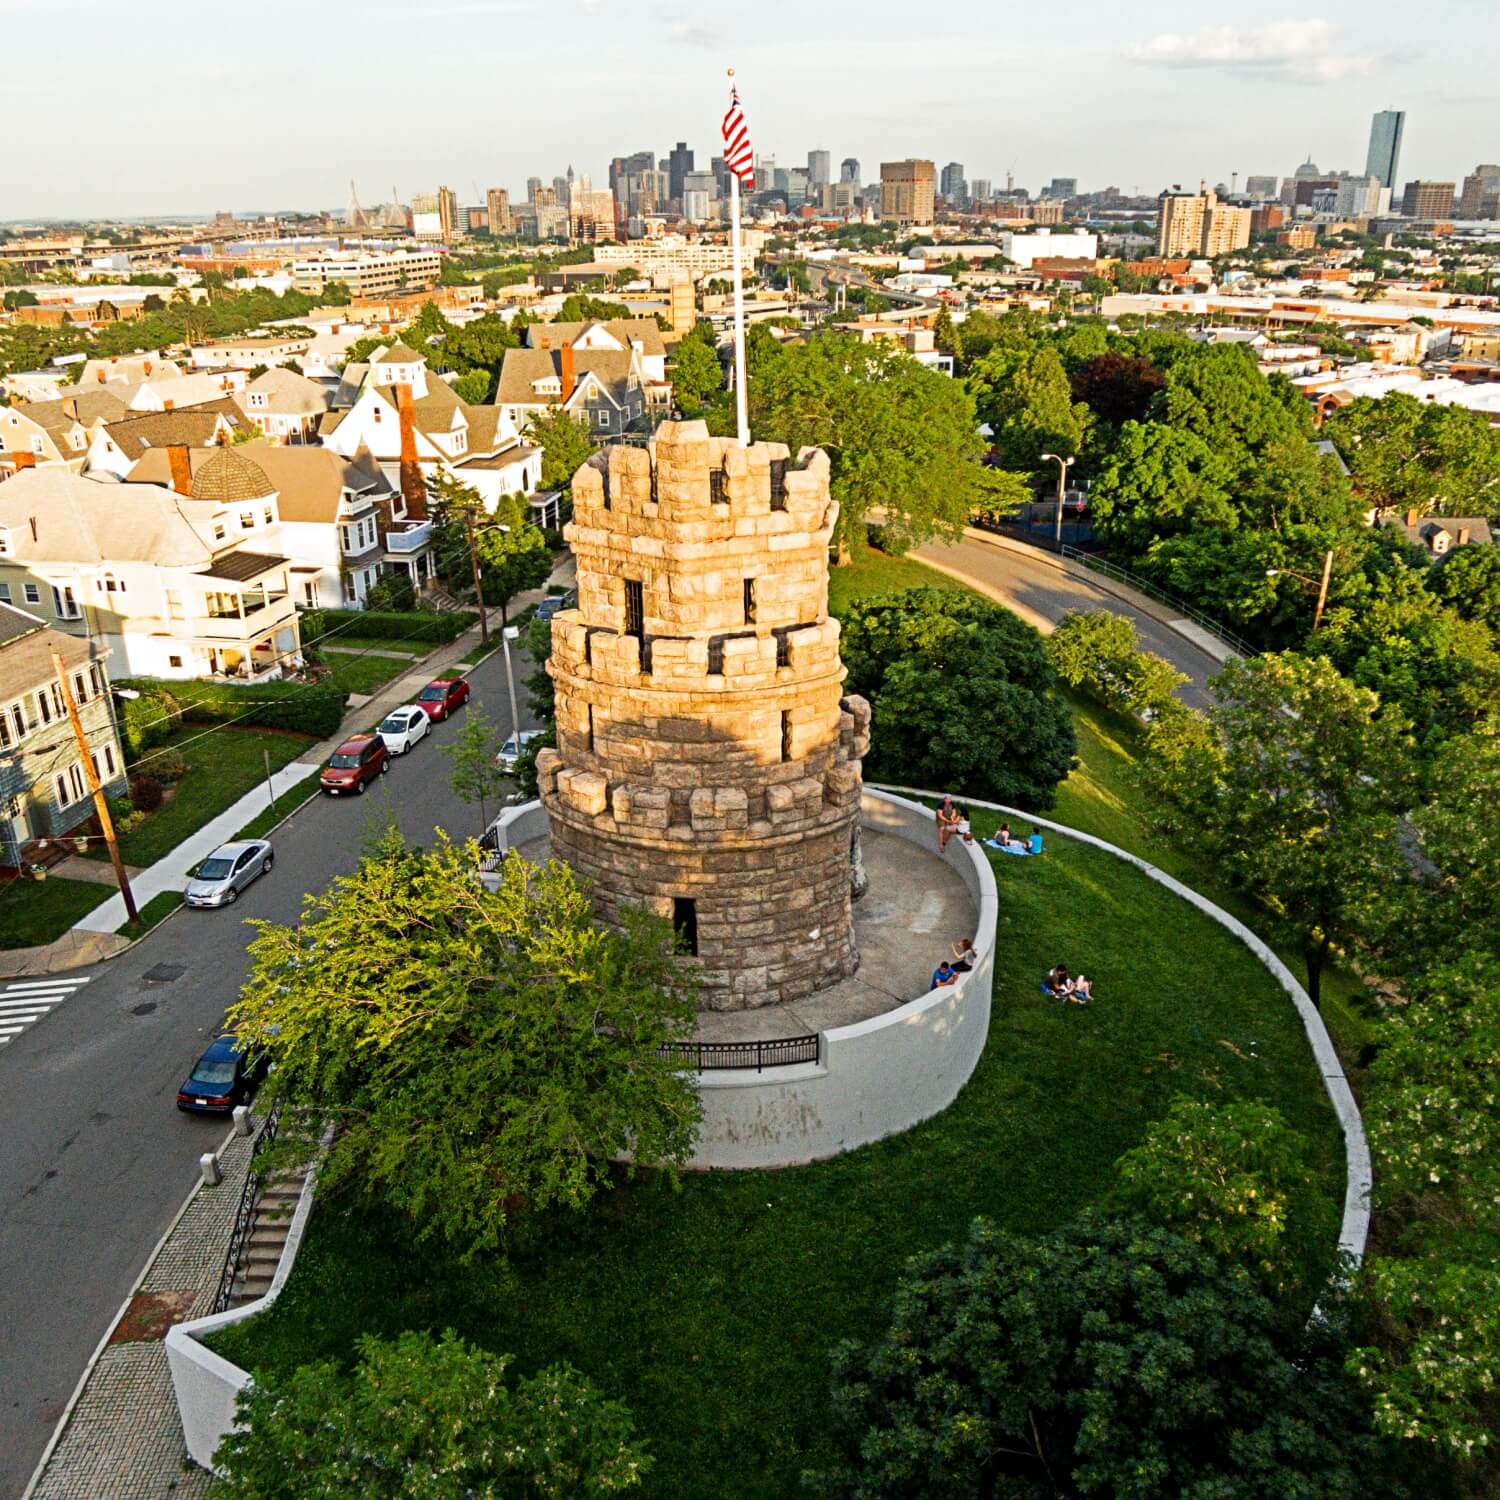 Prospect Hill Tower